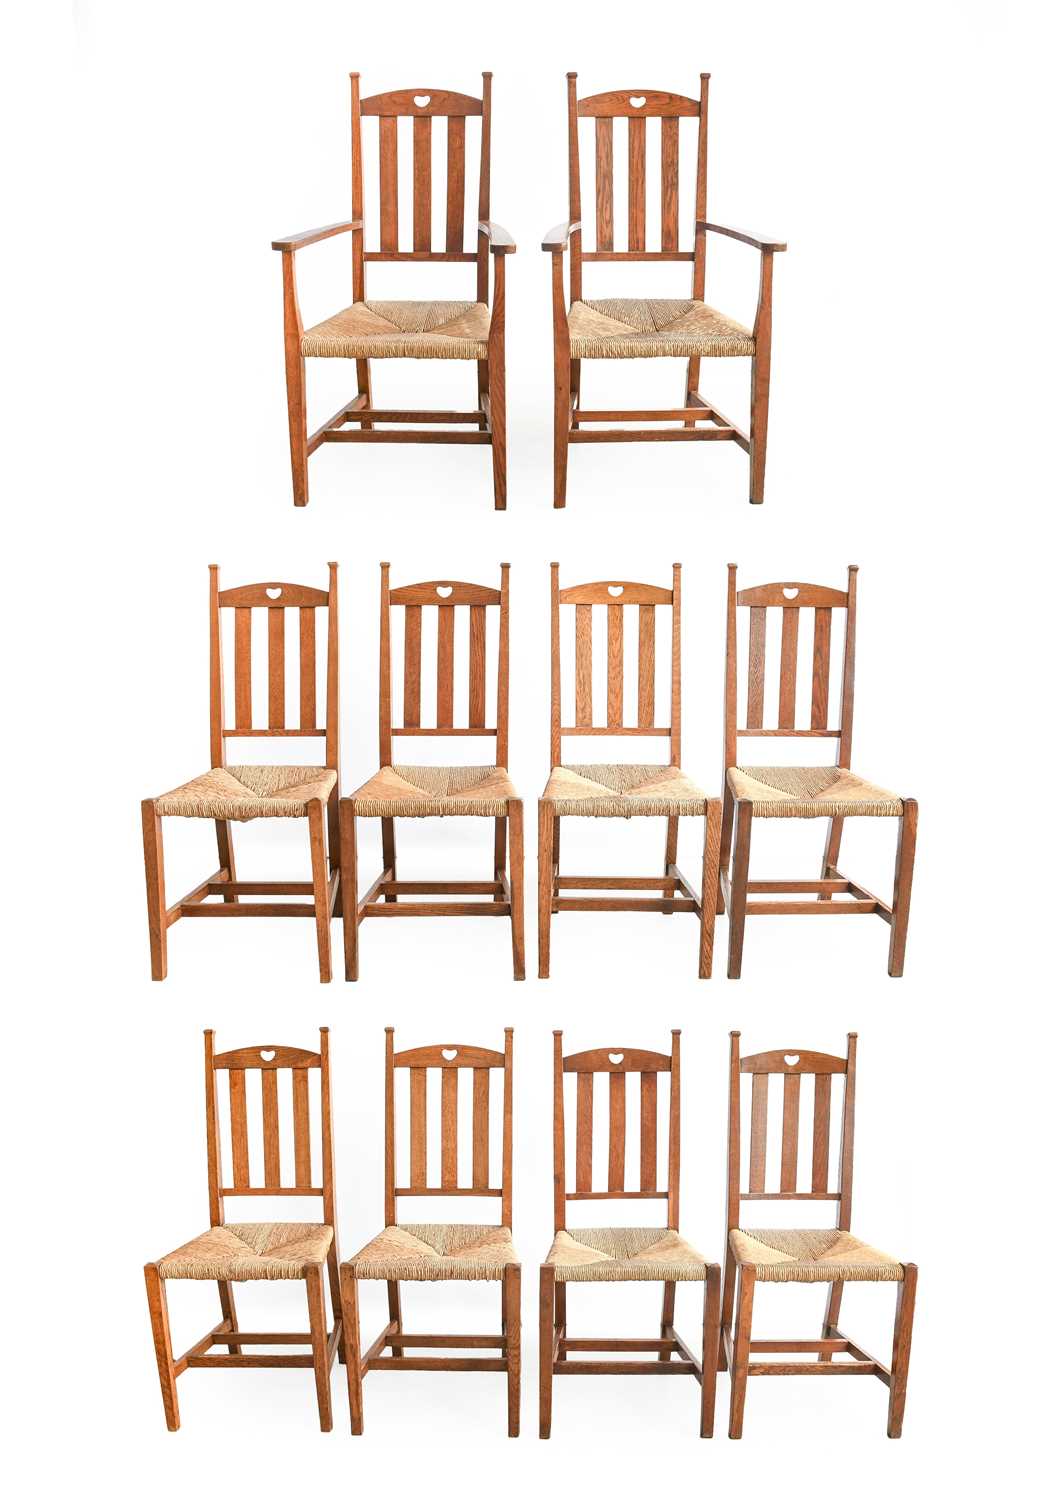 A Set of Ten (8+2) Arts & Crafts Oak Dining Chairs, made by William Birch, each with arched top rail